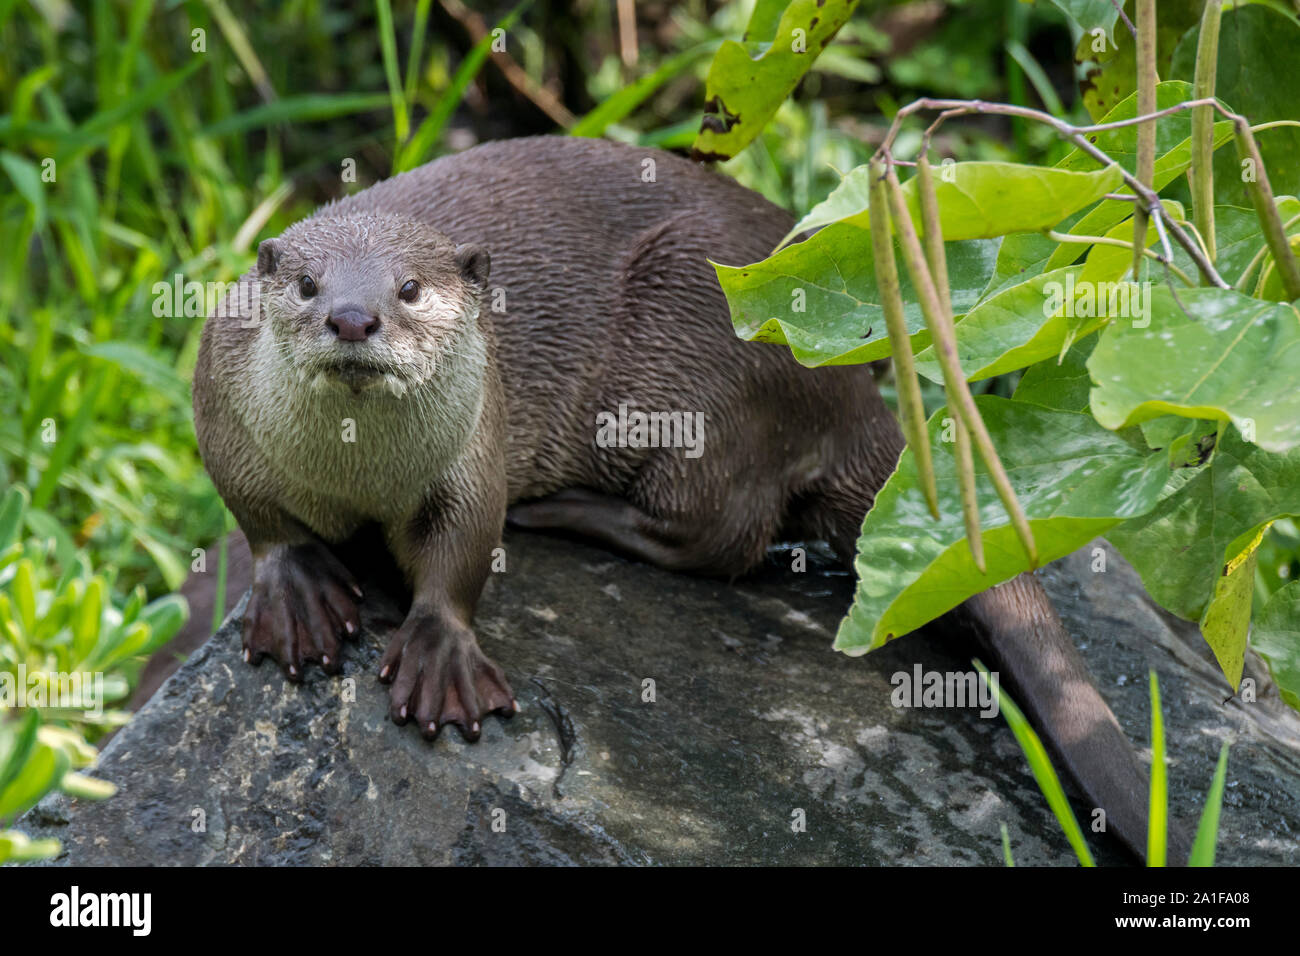 Smooth-coated otter (Lutrogale perspicillata / Lutra perspicillata) on river bank, native to the Indian subcontinent and Southeast Asia Stock Photo